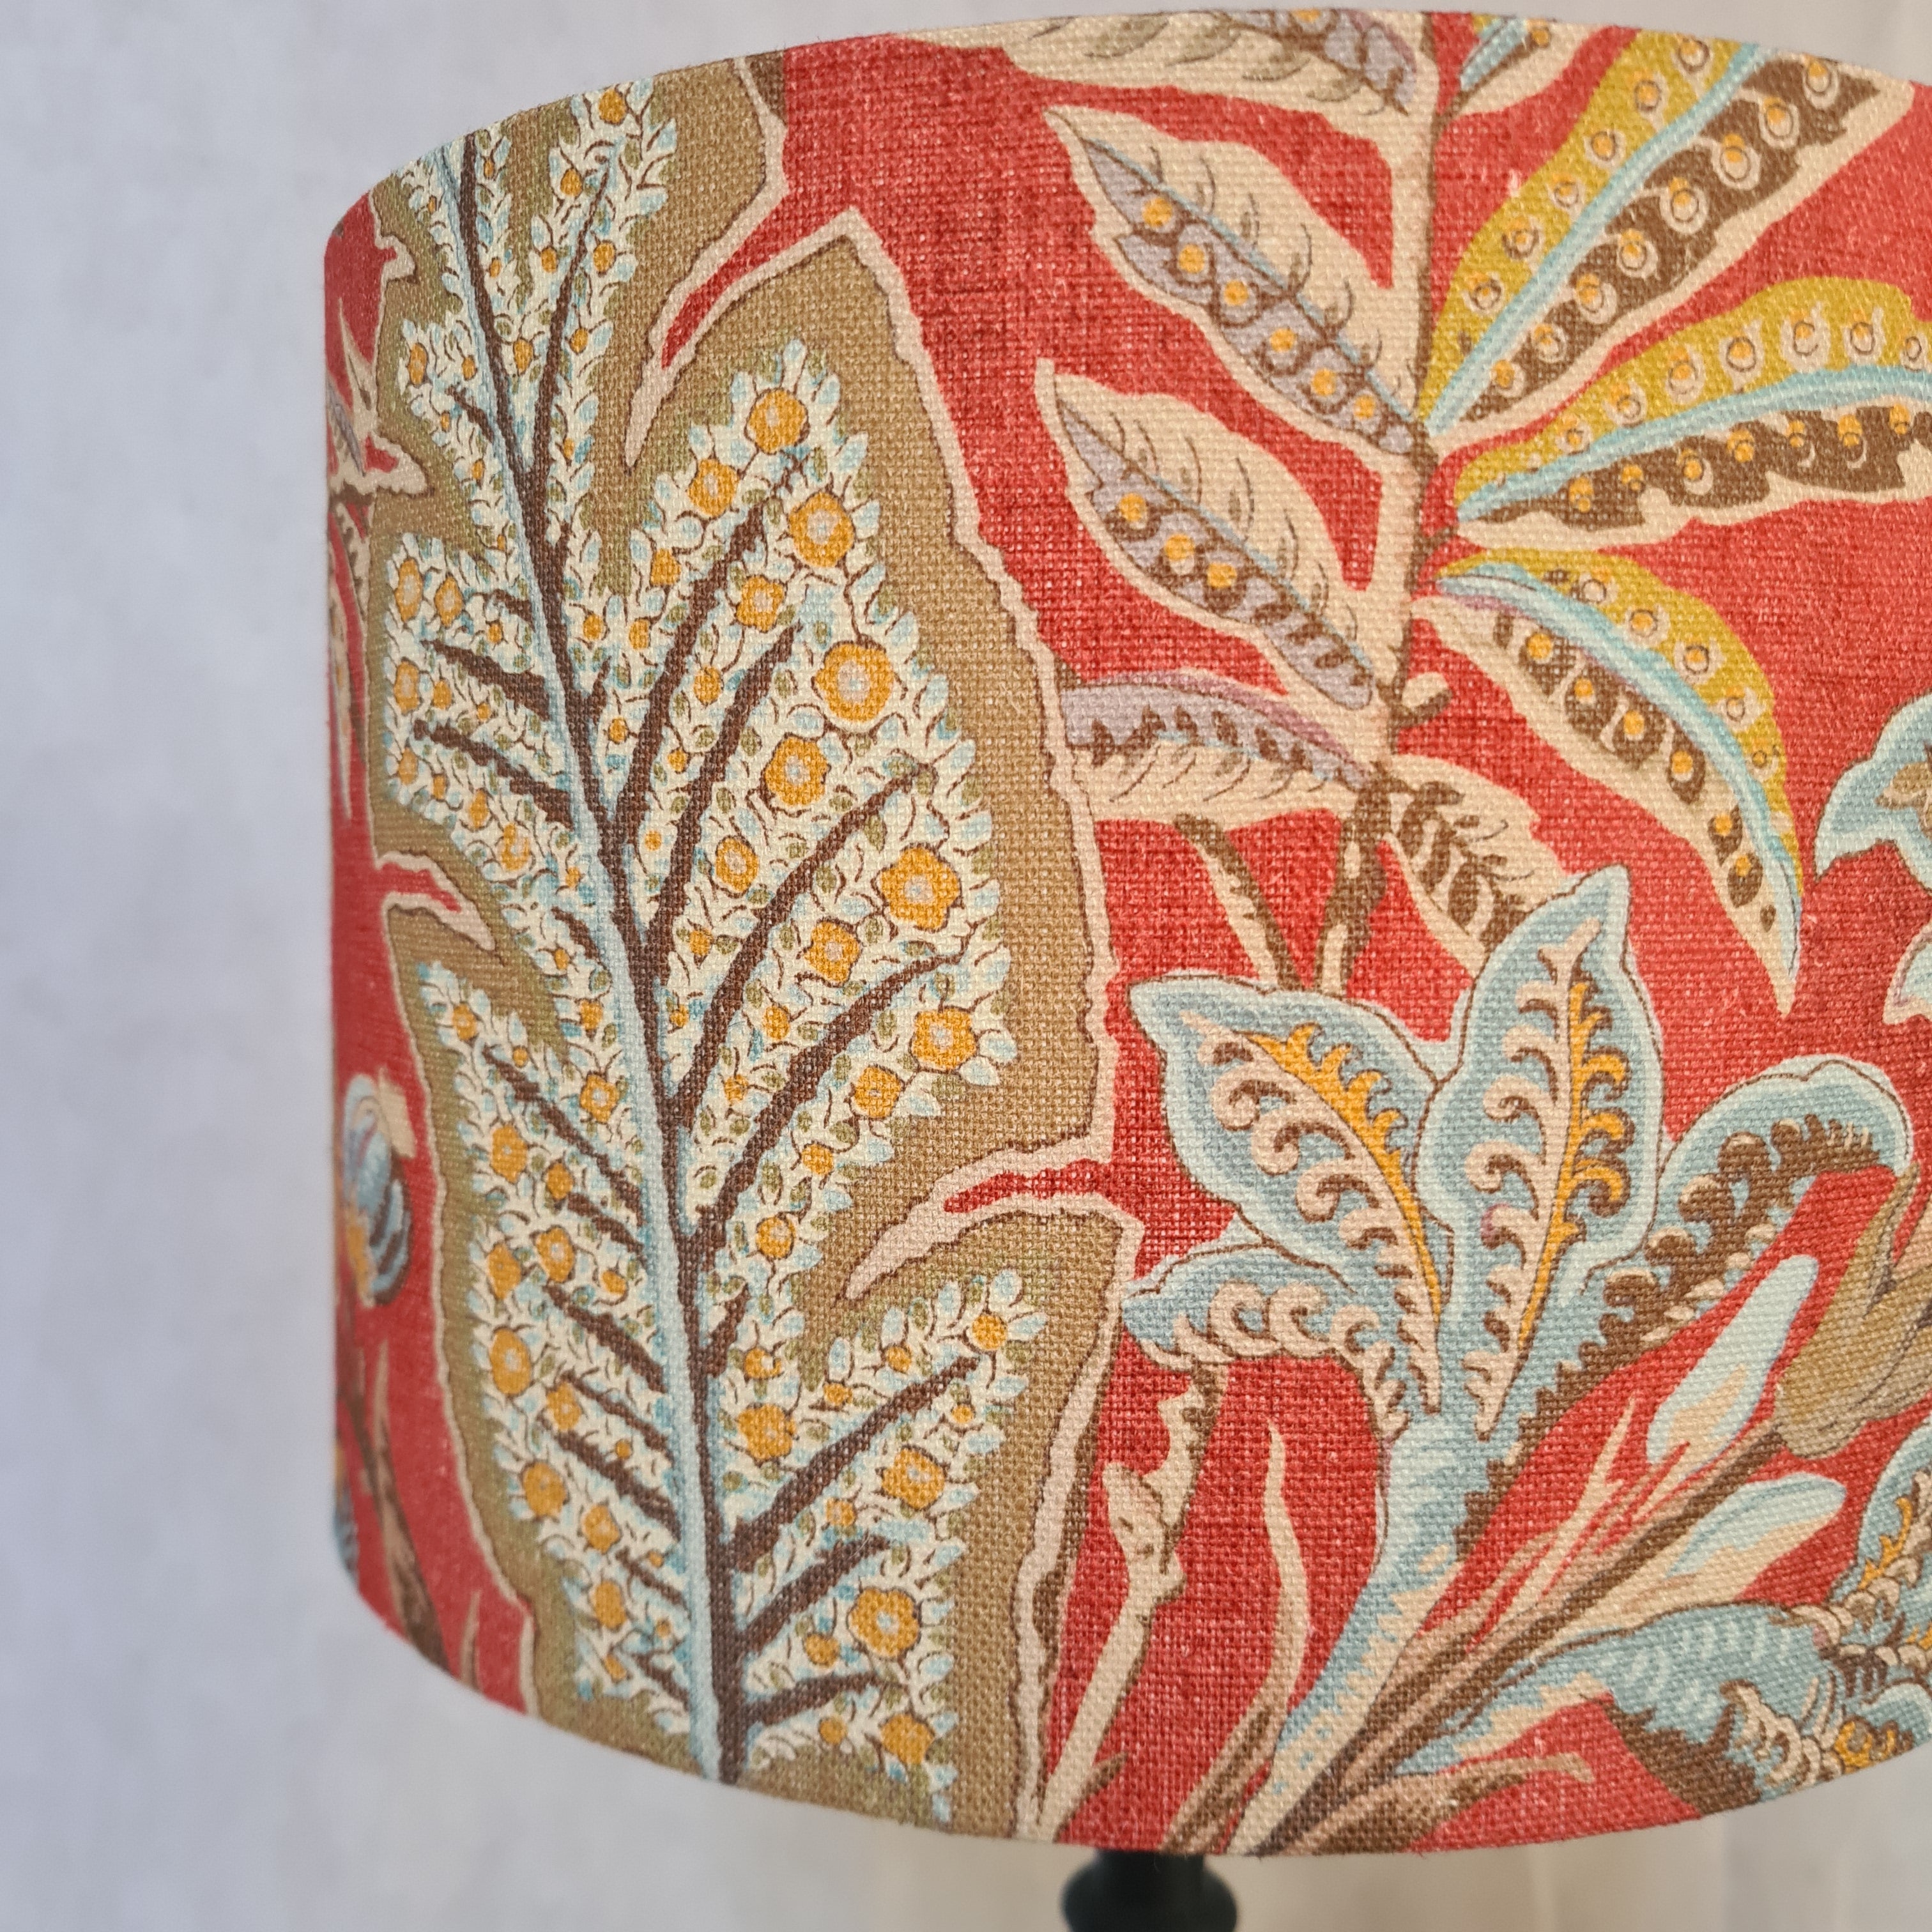 Stylised Leafy Floral Lampshade